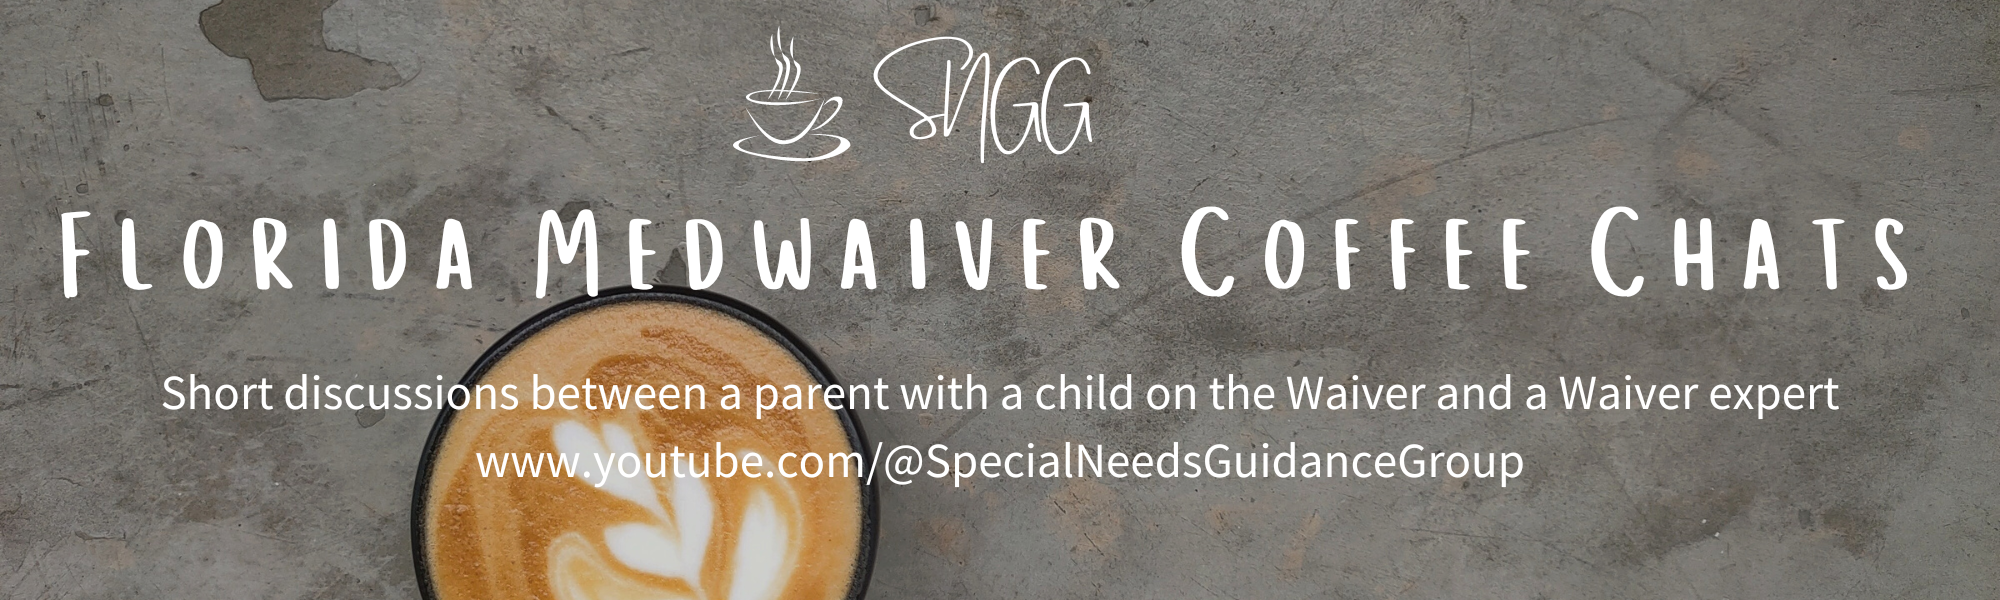 SNGG Florida Medwaiver Coffee Chats